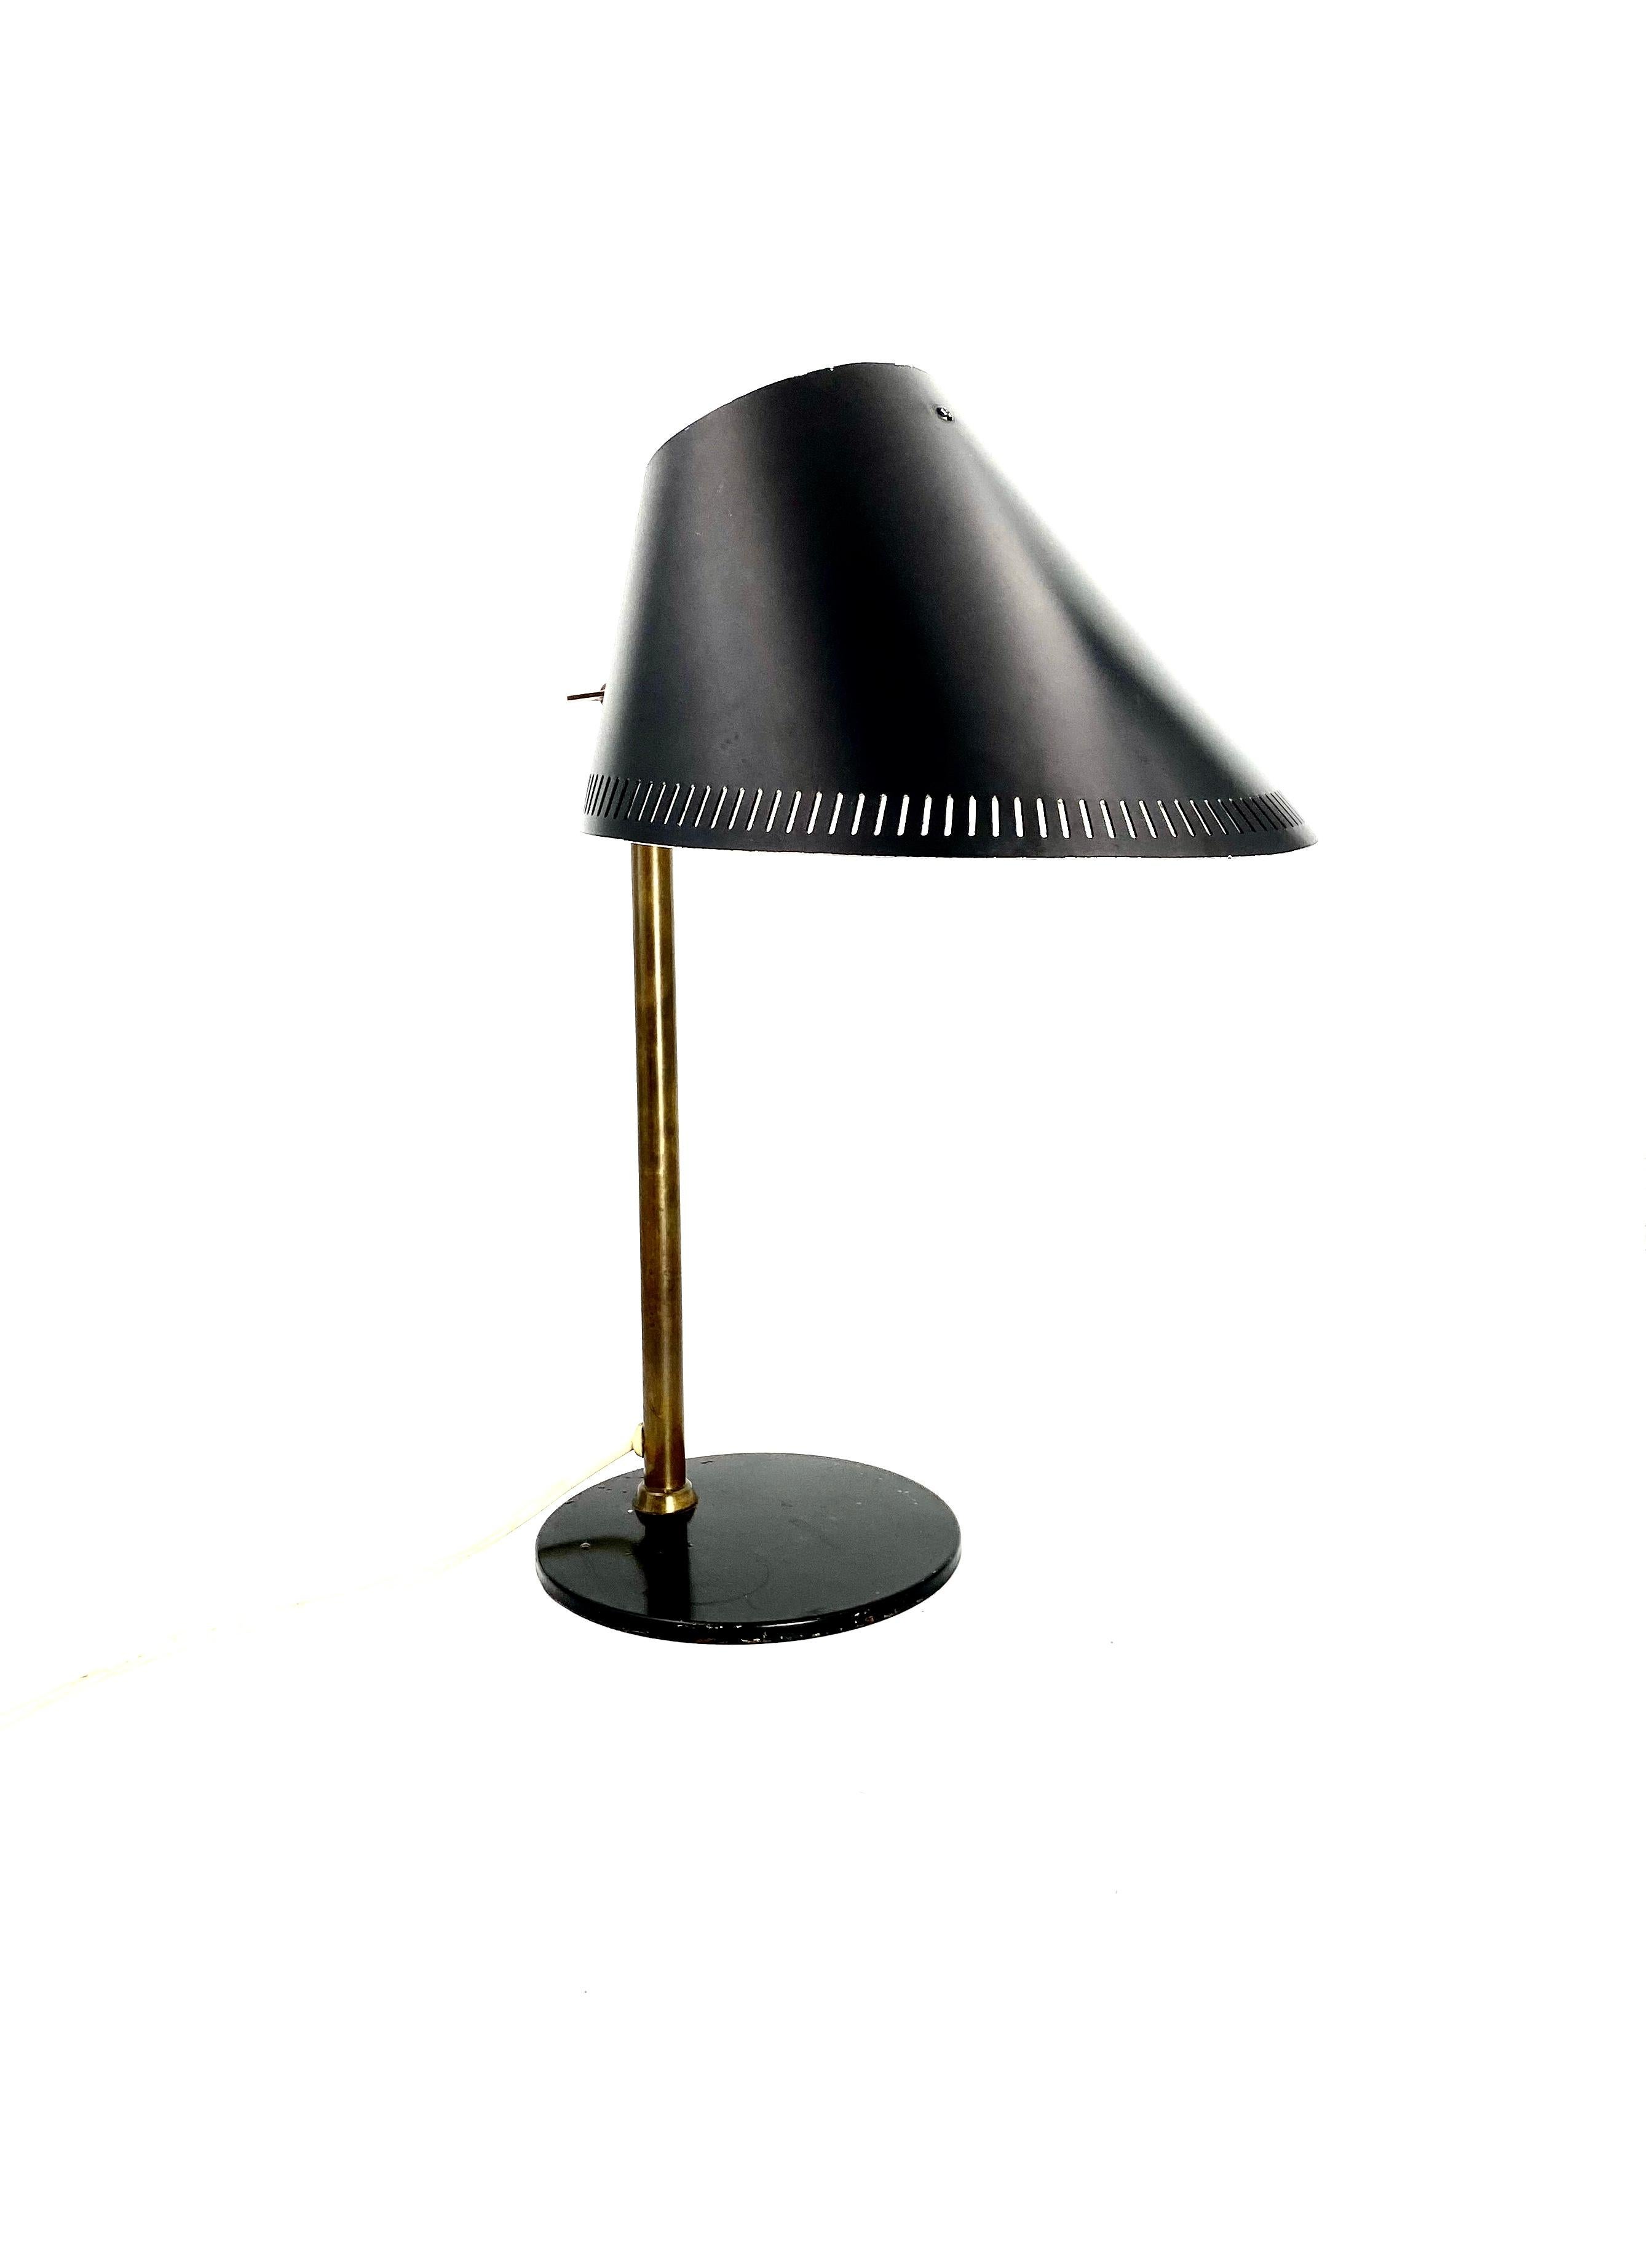 Paavo Tynell Rare Table Lamp Mod. 9227, by Taito E Idman, Finland, 1958 For Sale 11